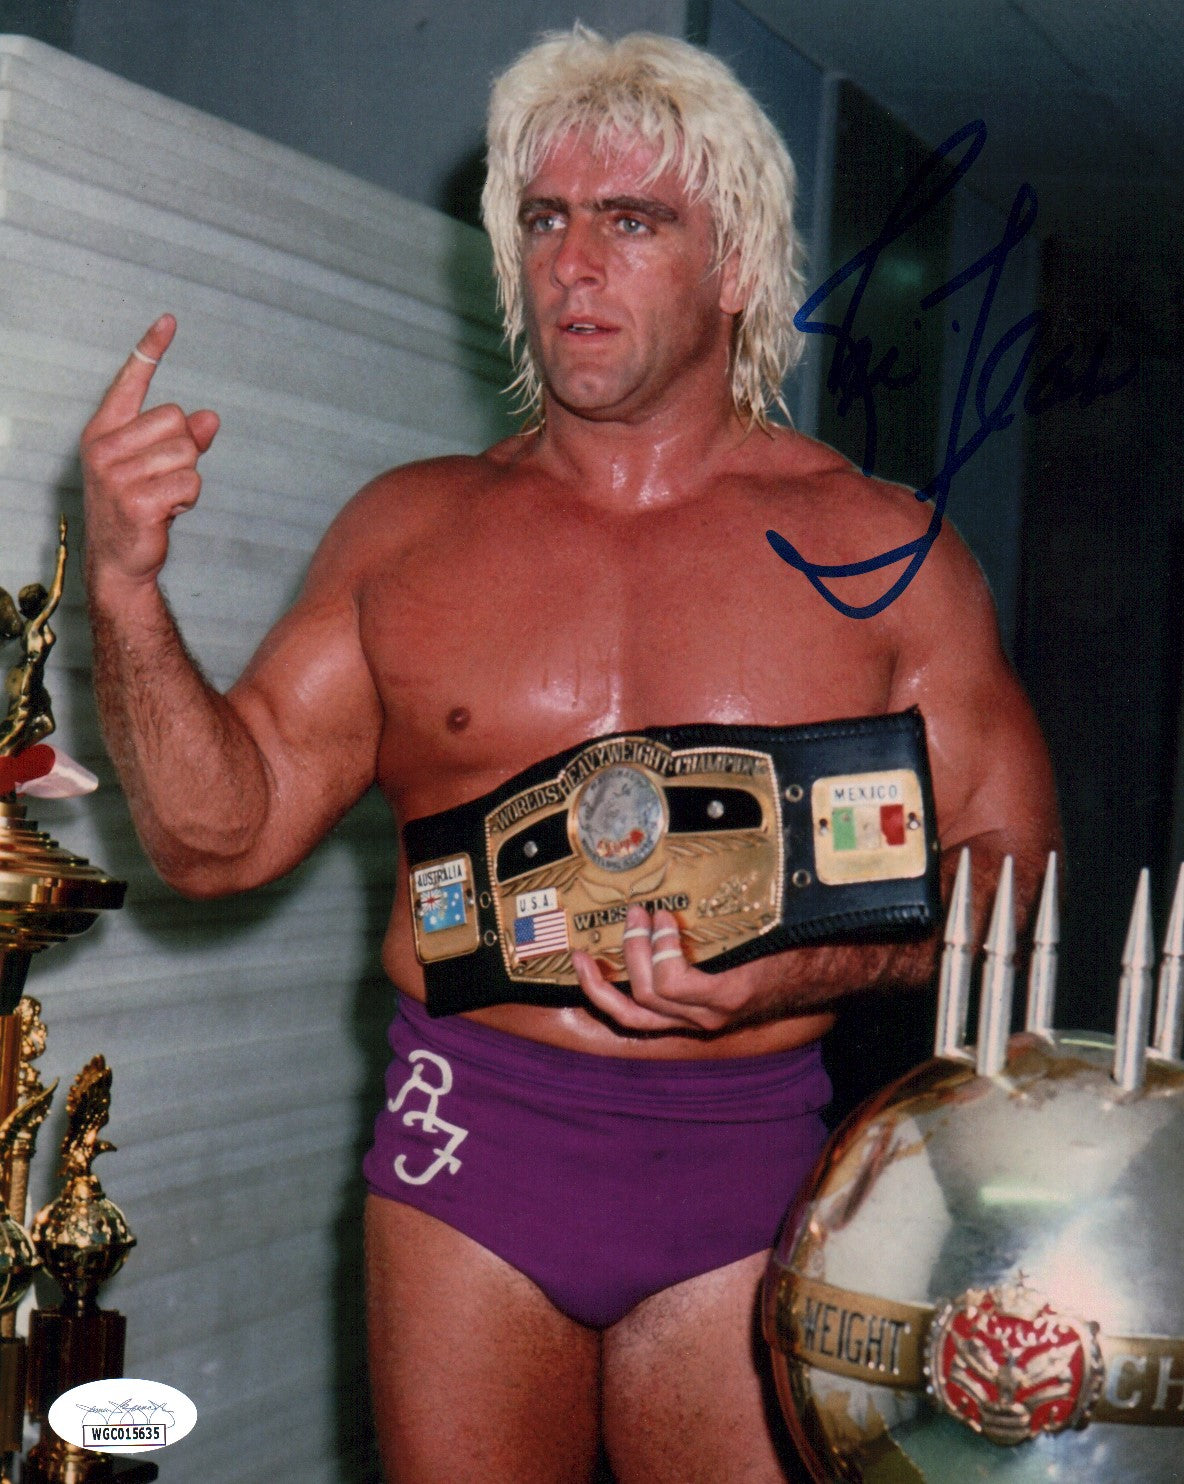 Ric Flair WWE Wrestling 8x10 Photo Signed Autograph JSA Certified Autograph